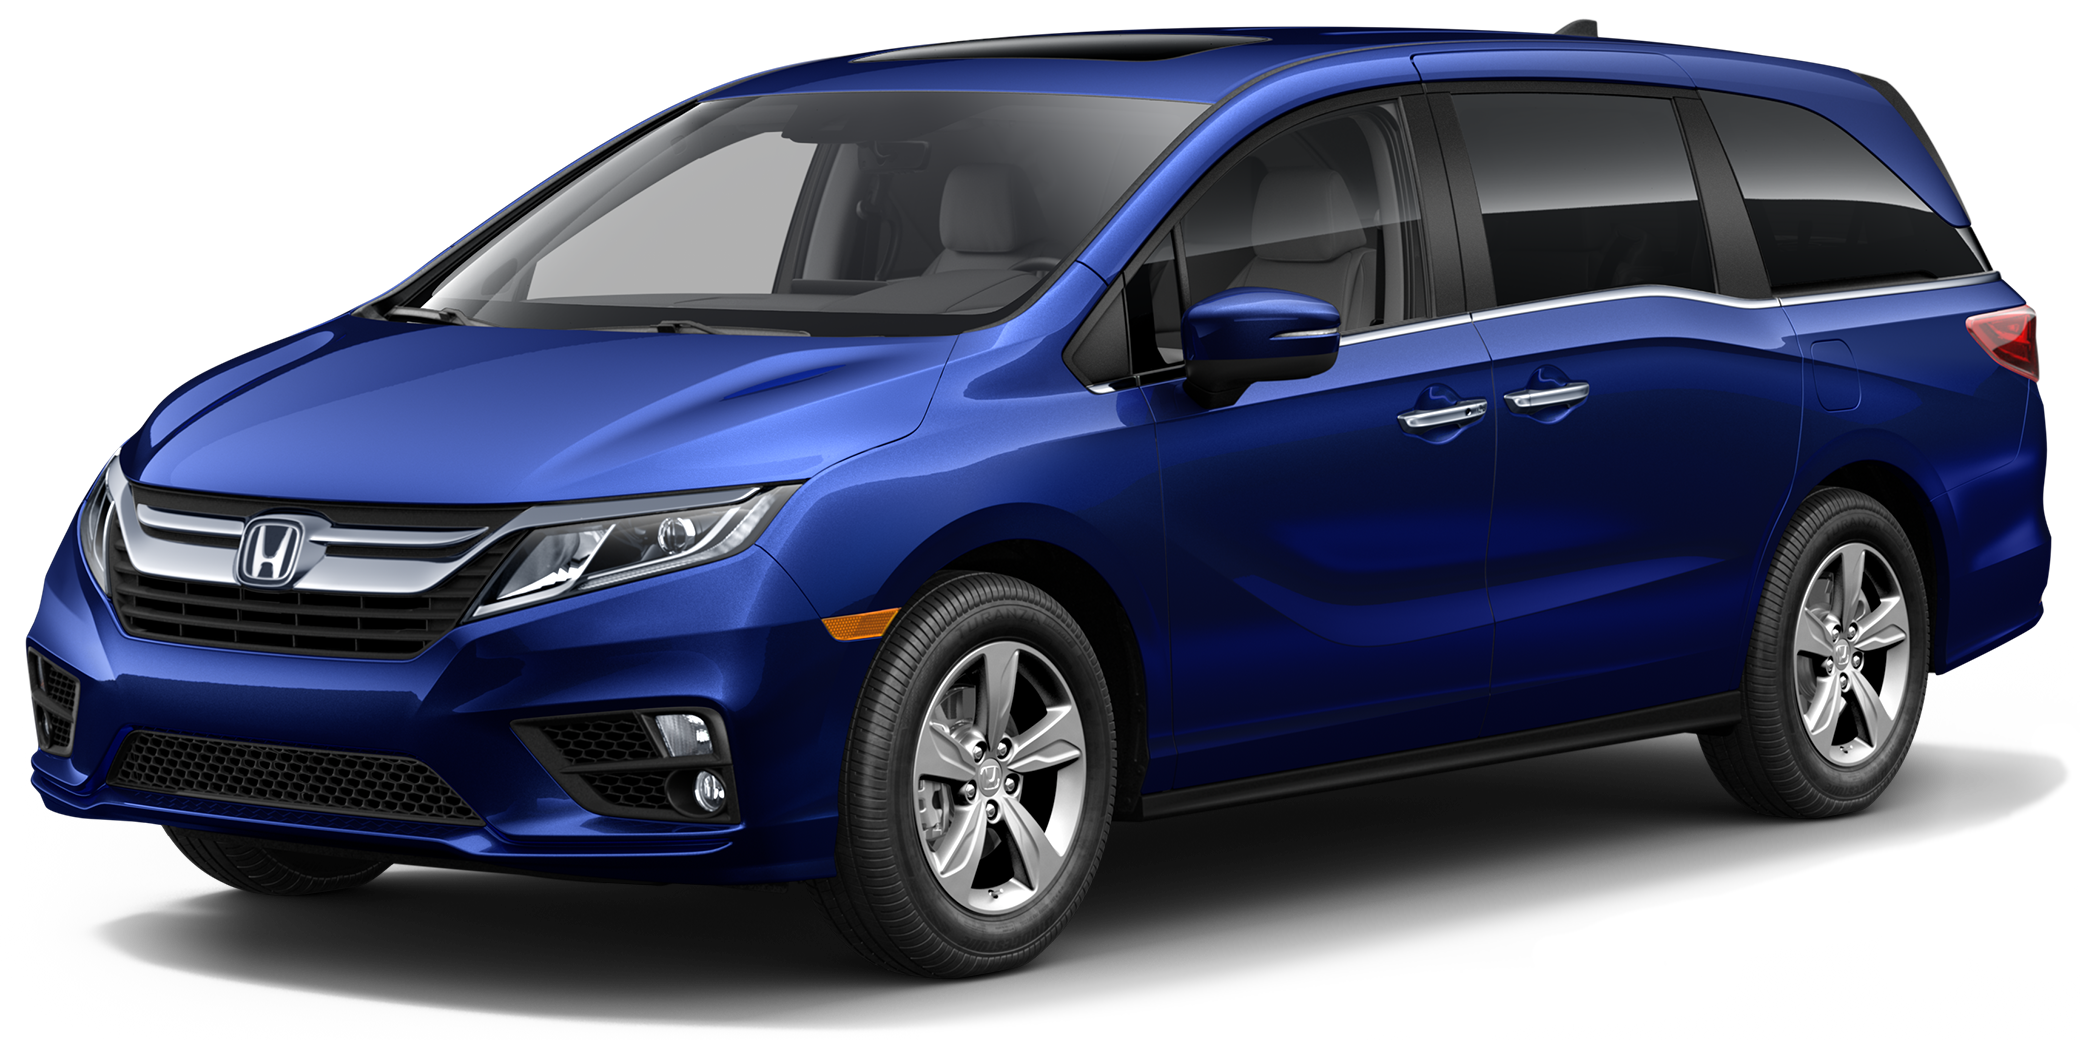 2019 Honda Odyssey Incentives, Specials & Offers in Fairfield OH